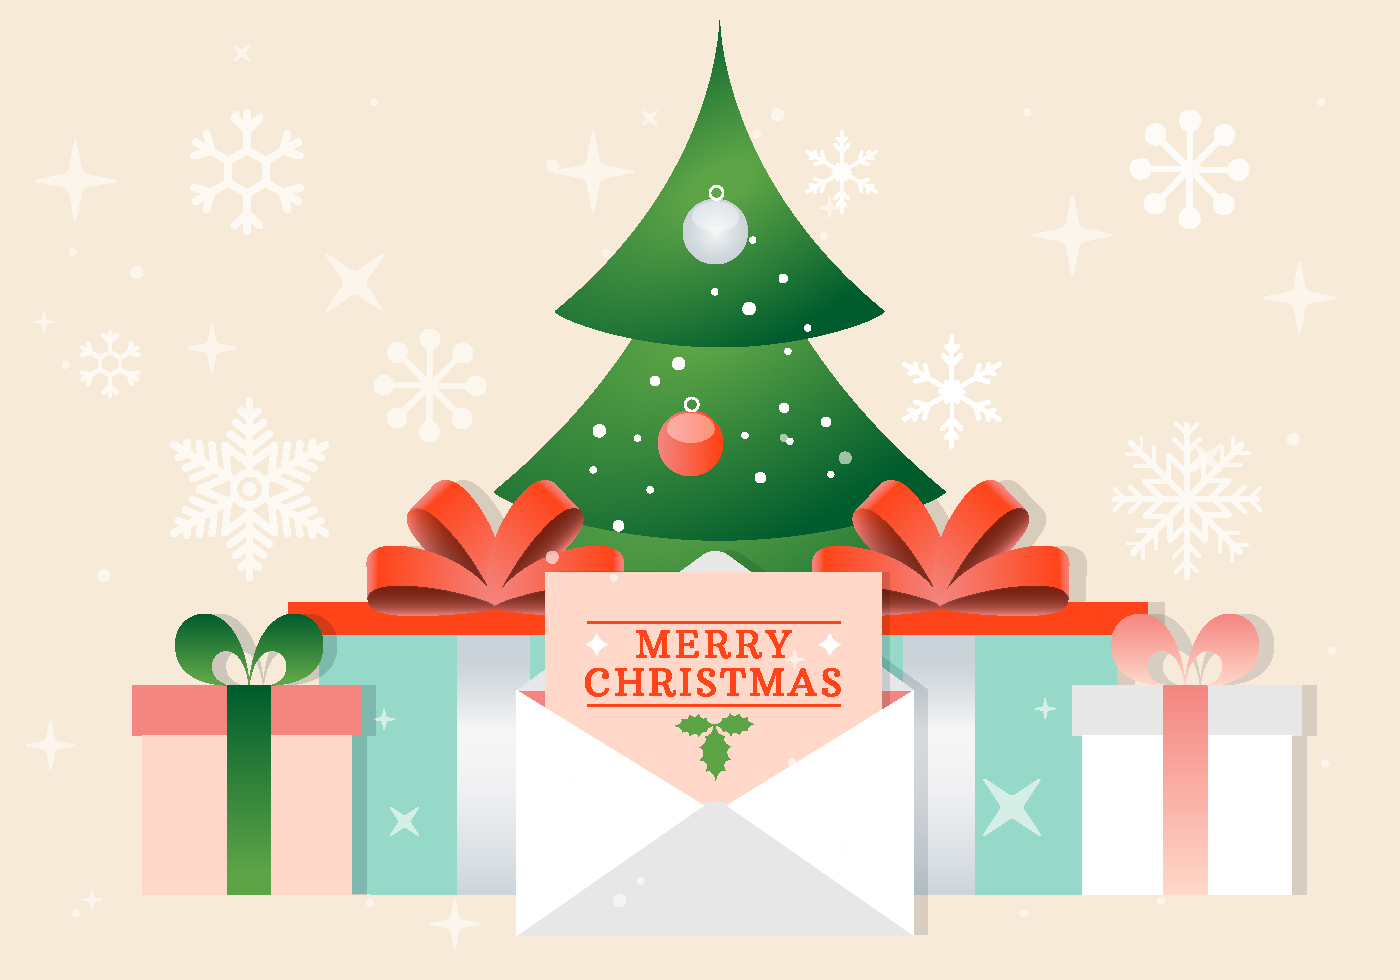 Free Vector Christmas Background - Download Free Vectors ...